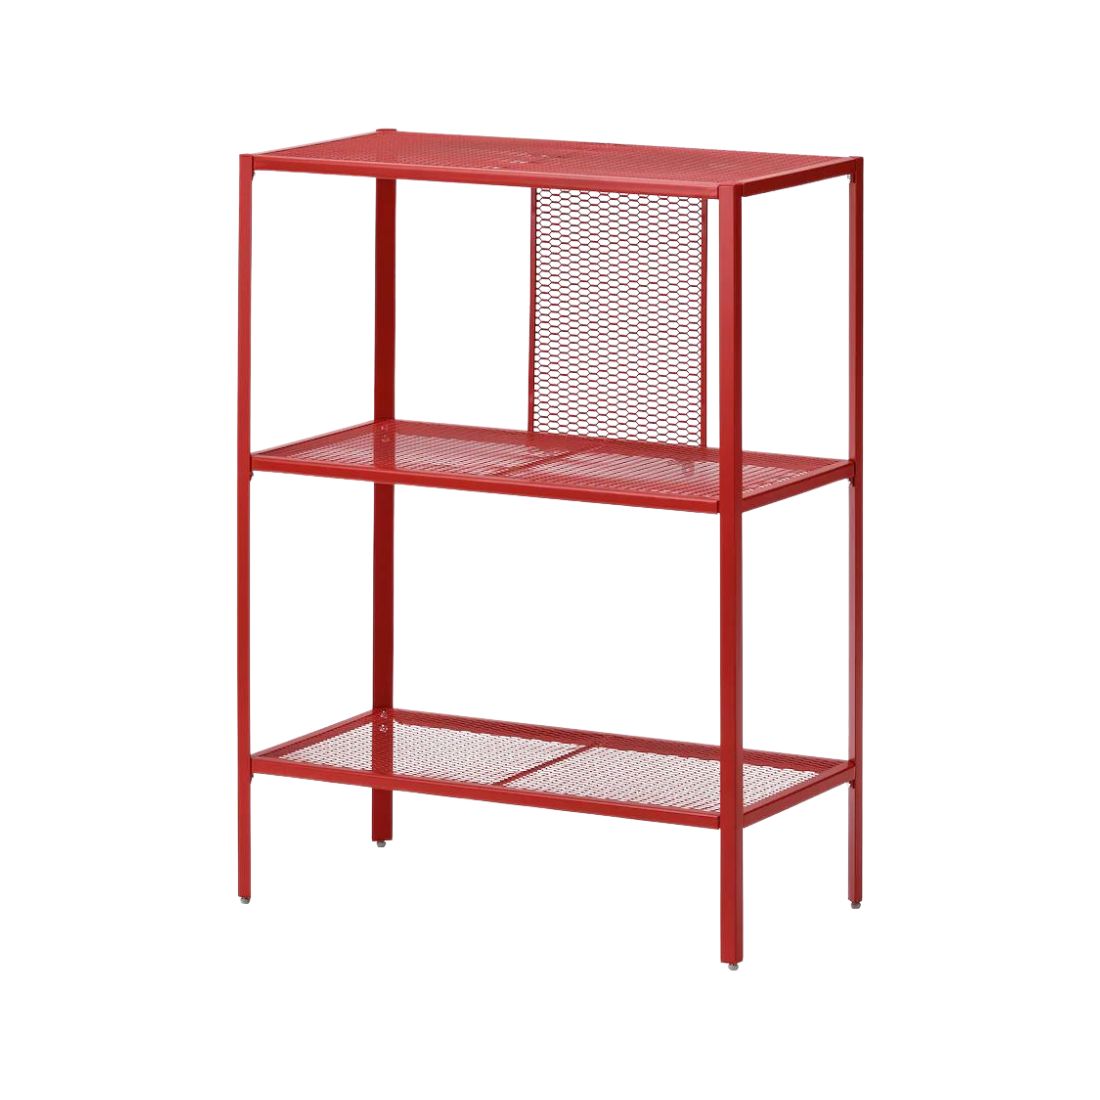 Red 3 Tier Shelving Unit